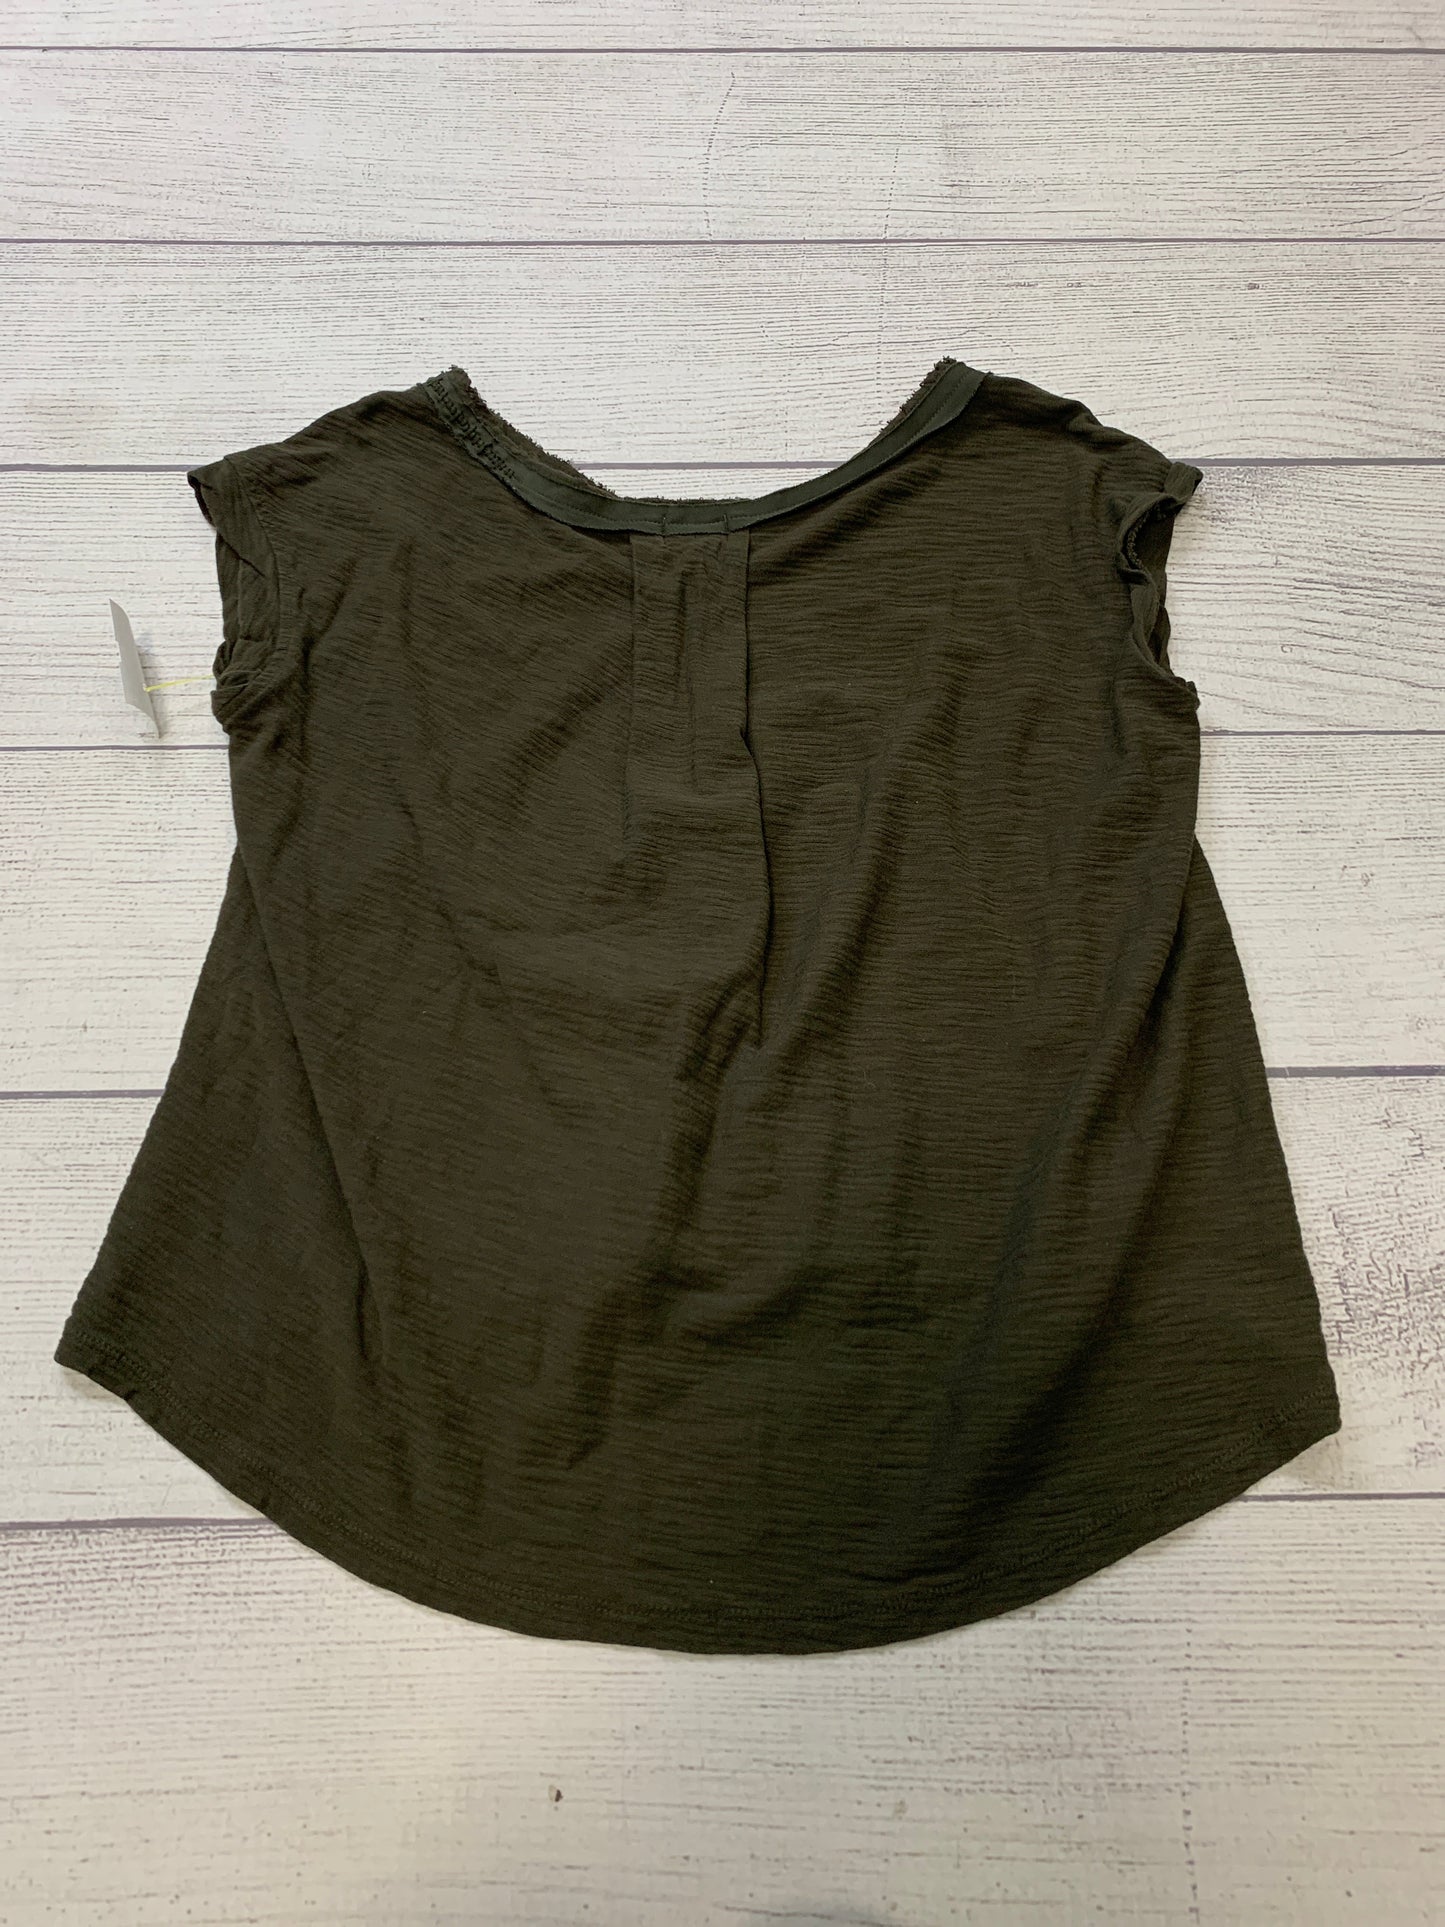 Green Top Short Sleeve Anthropologie, Size S